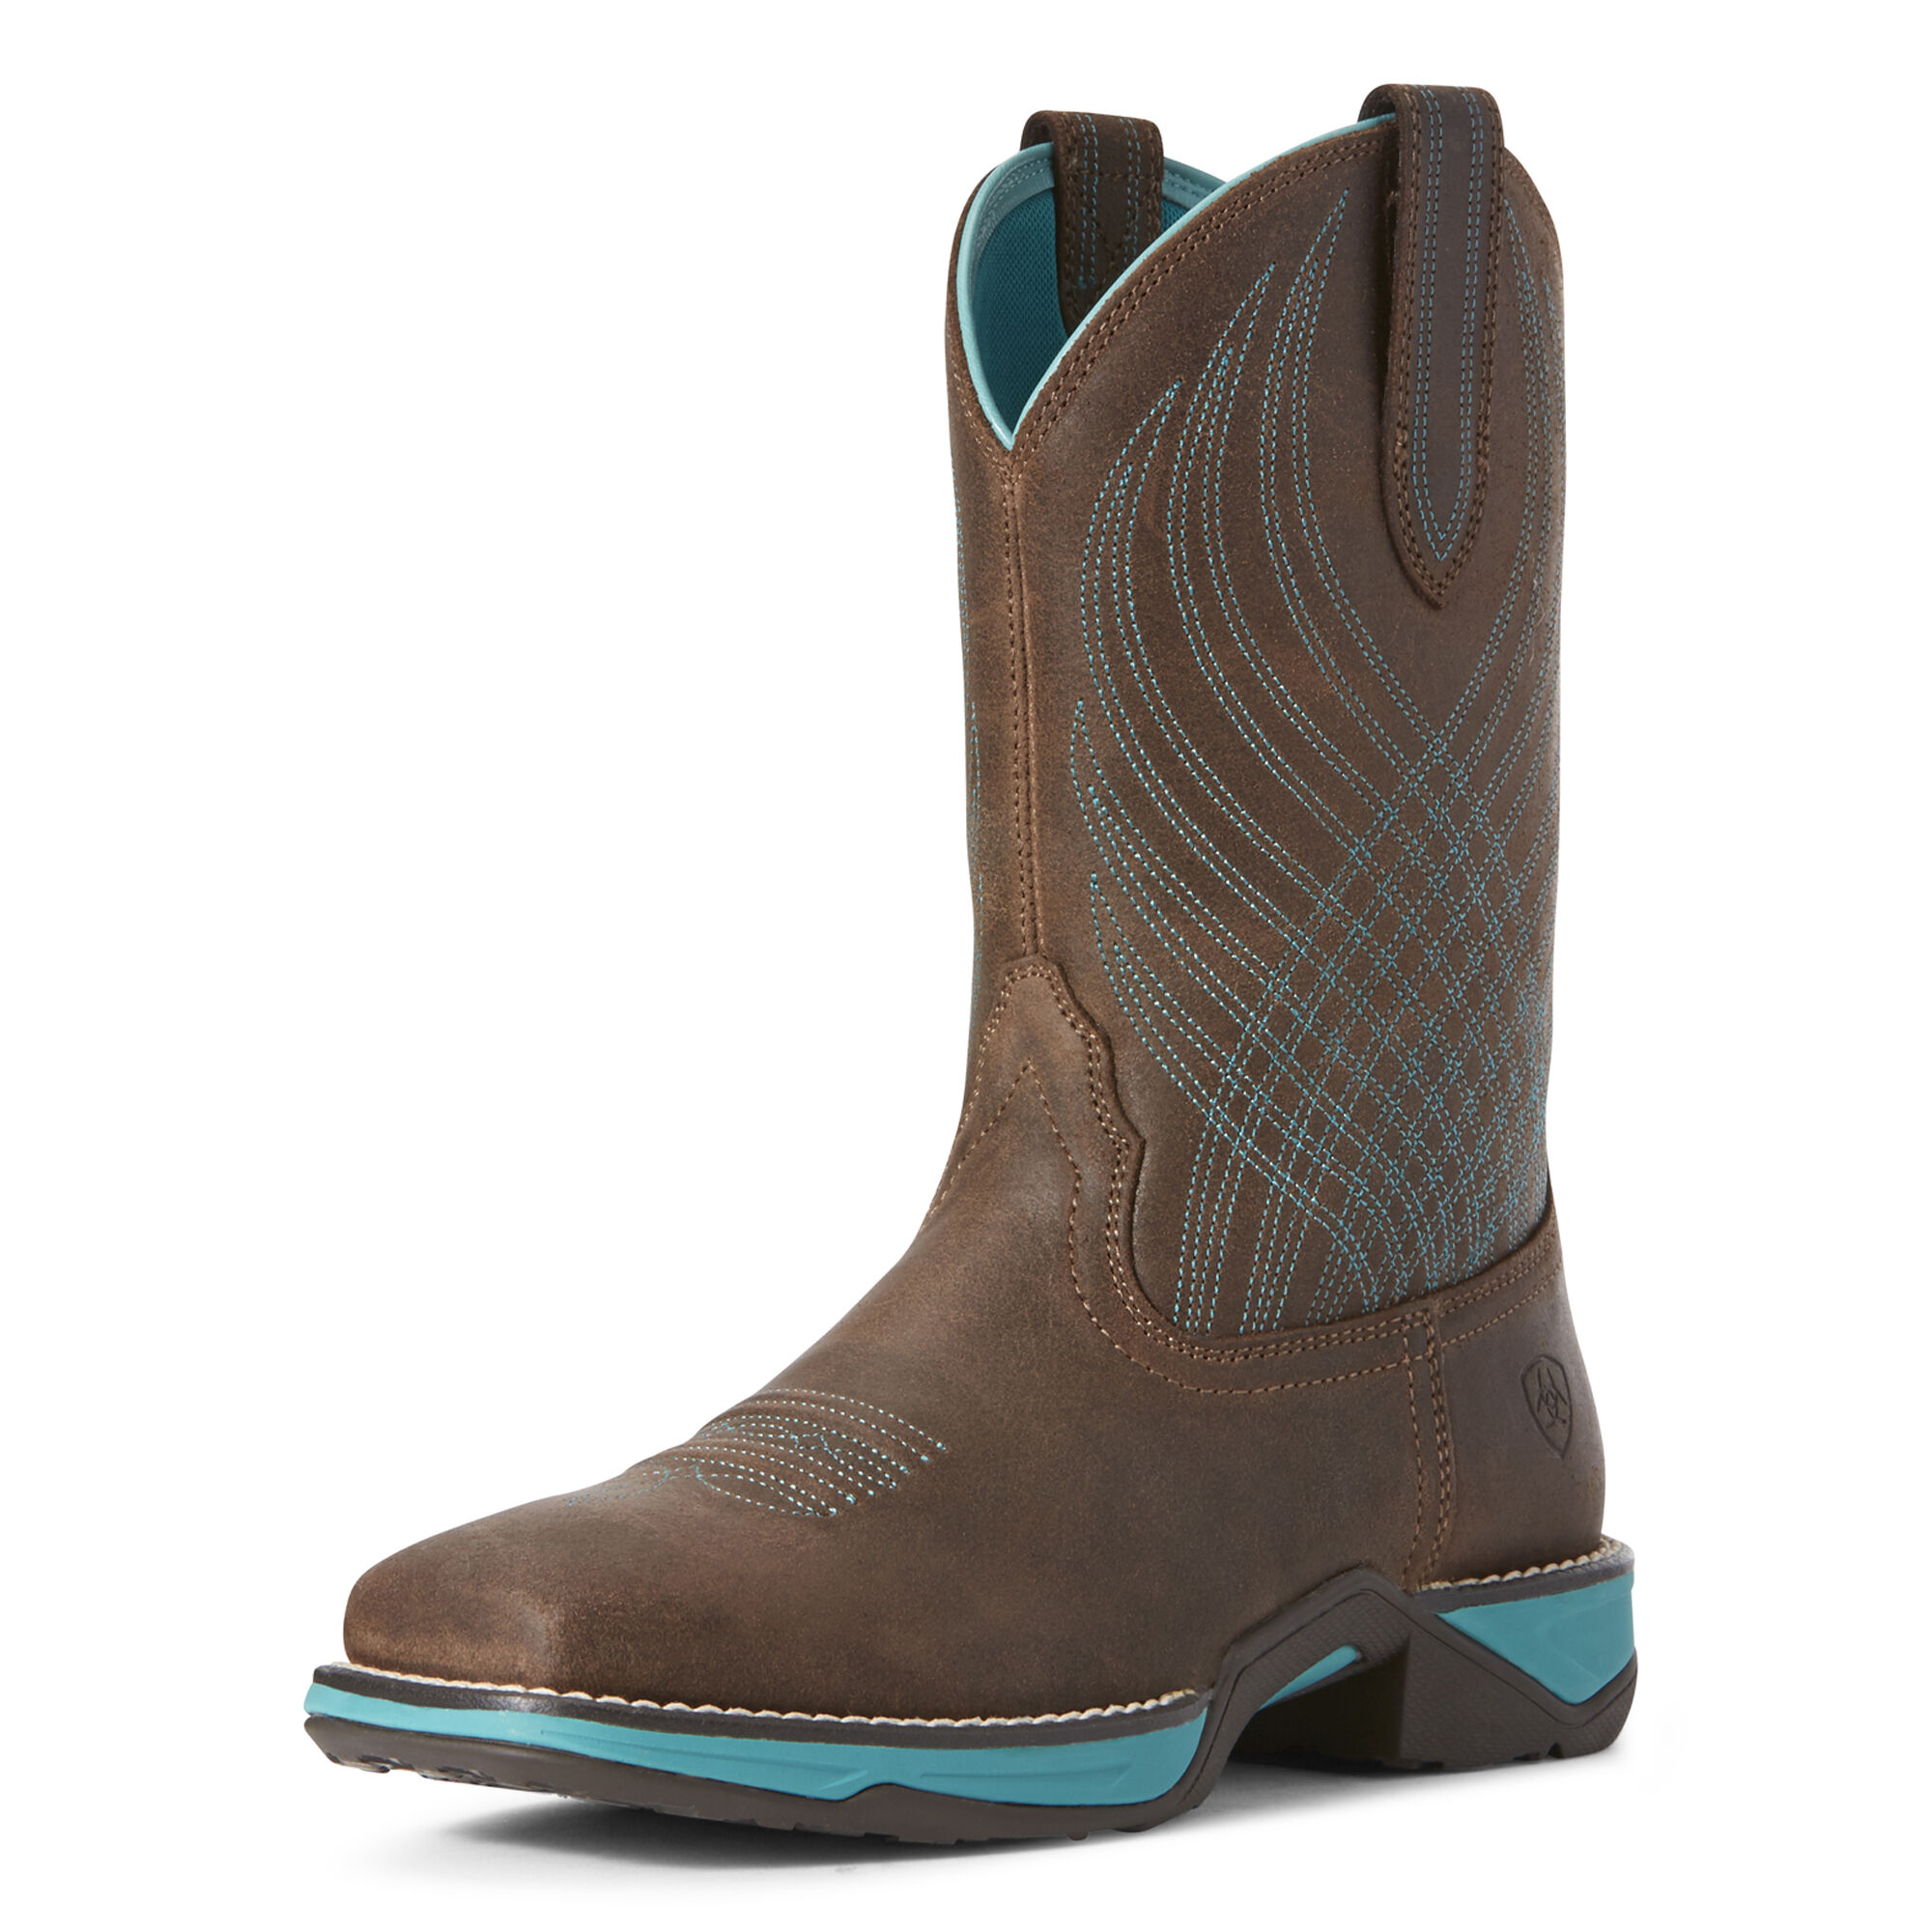 Women's Anthem Western Boots in Java Leather  by Ariat